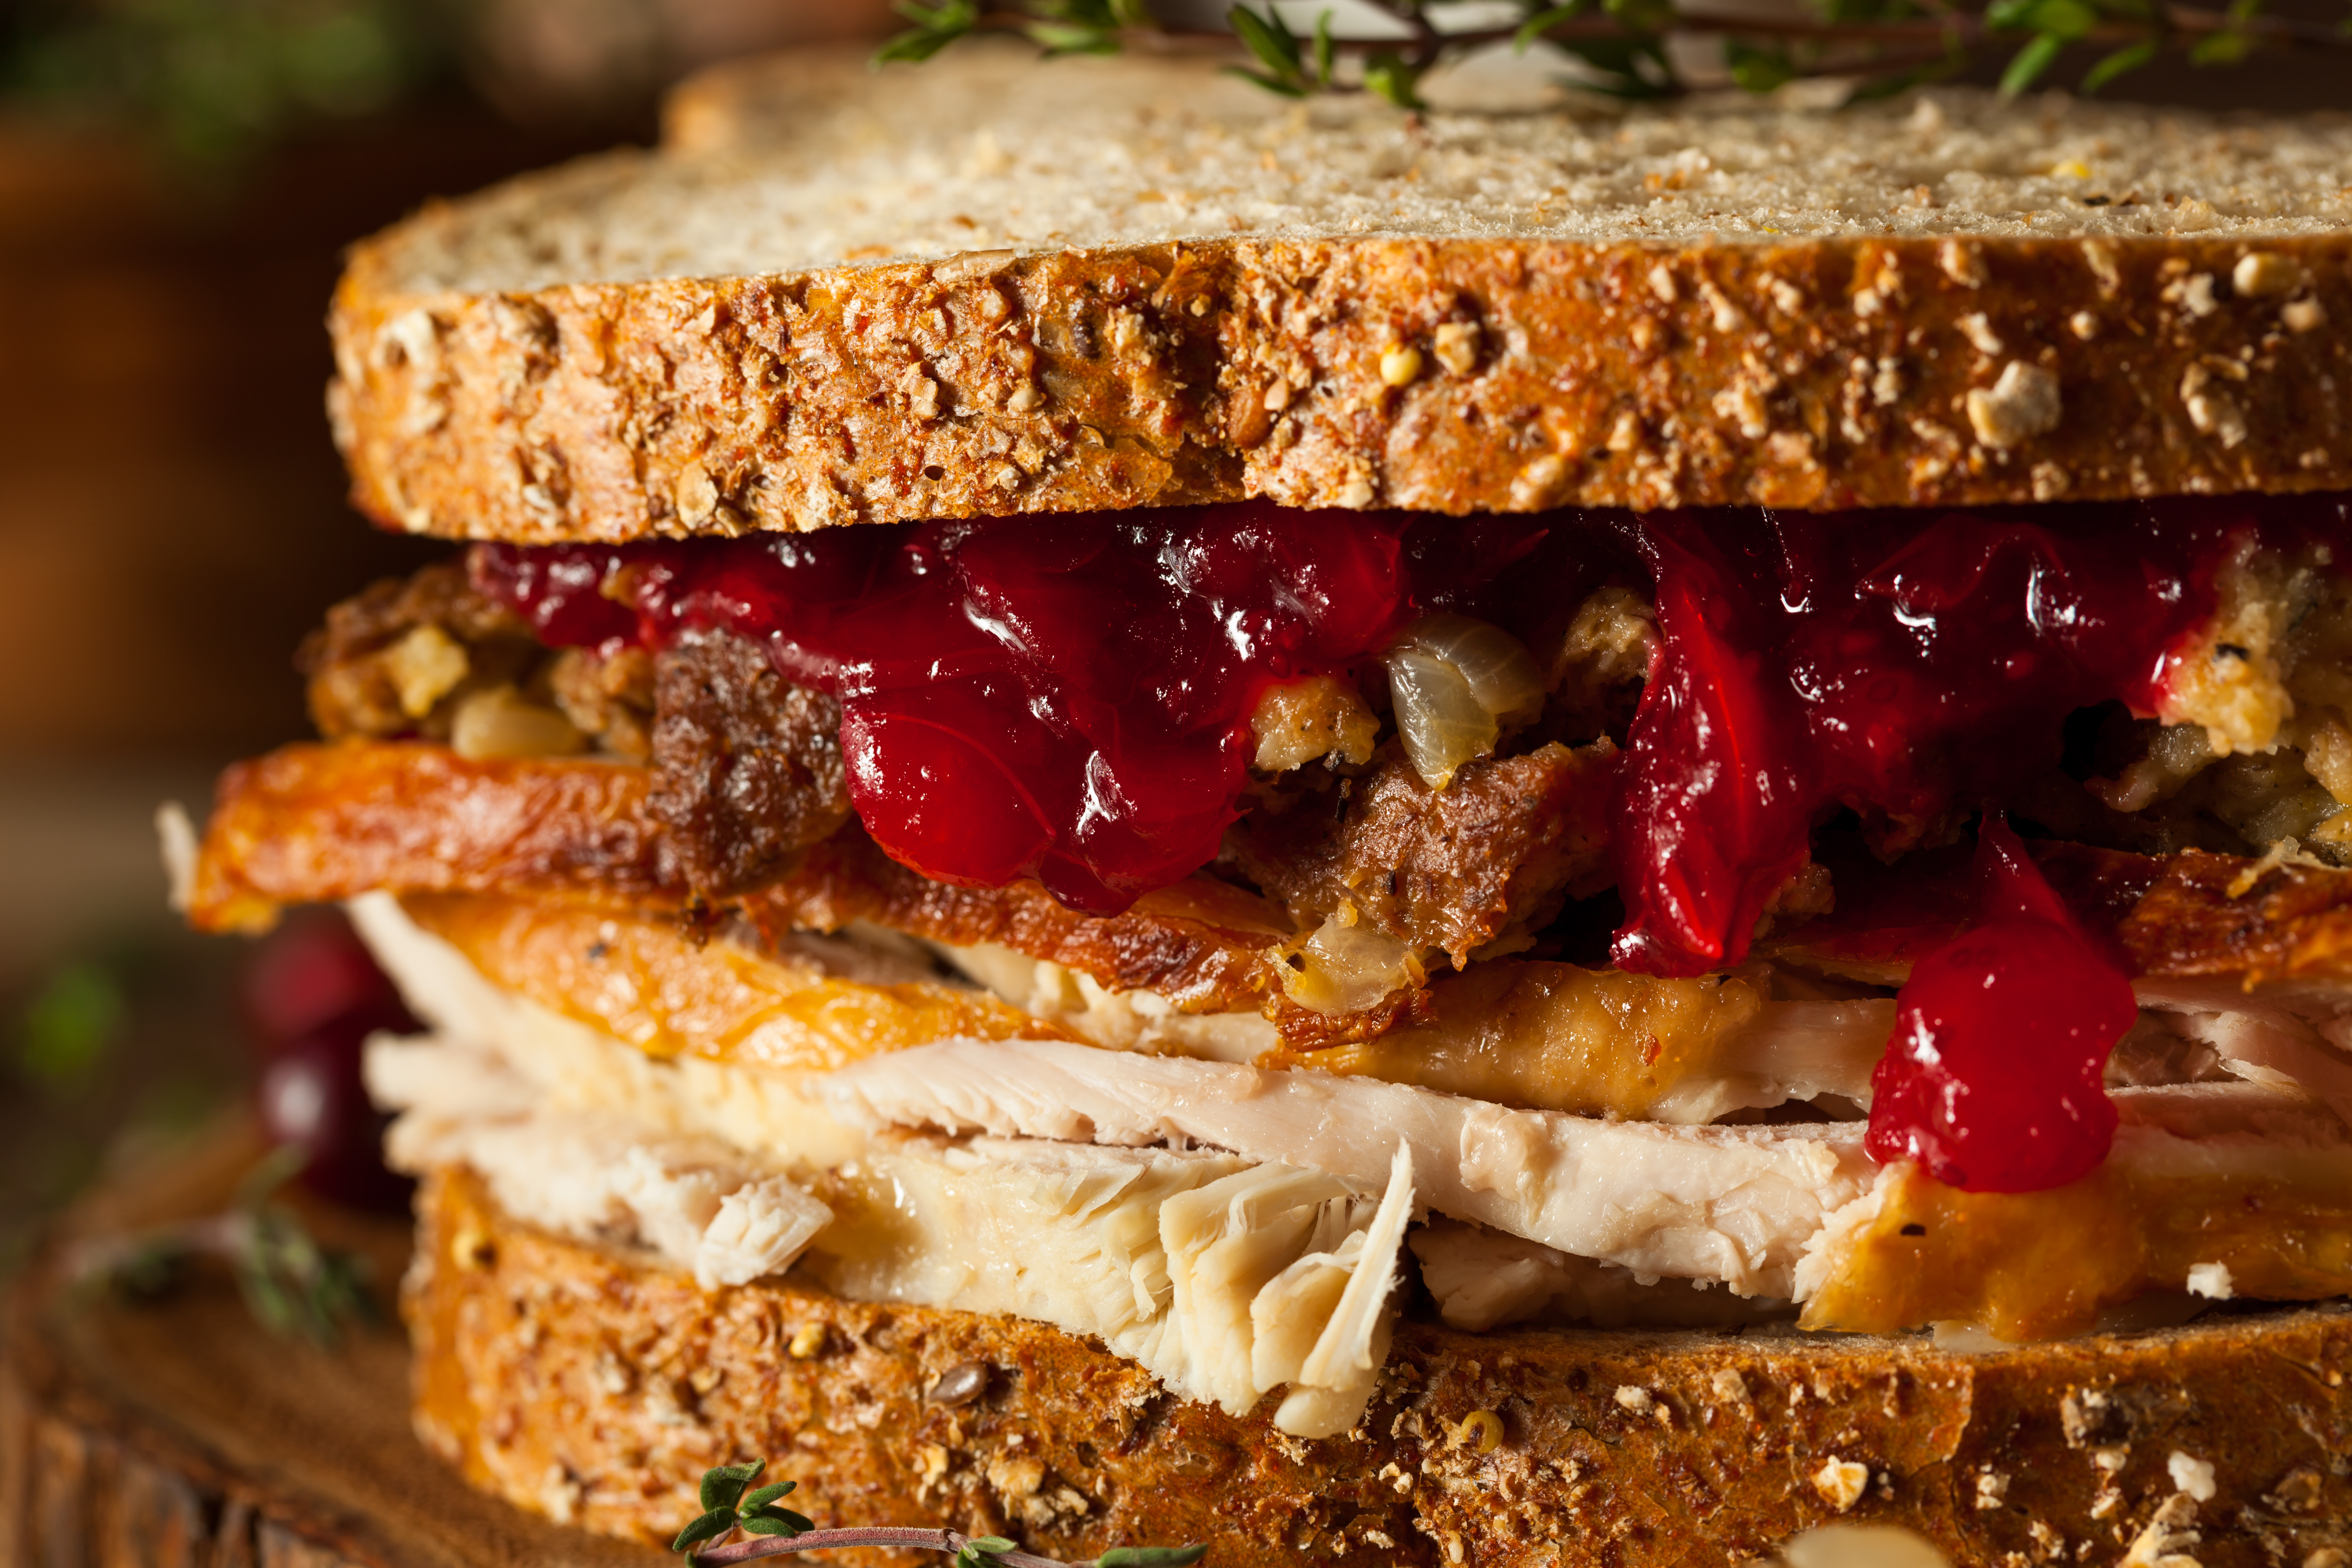 Old Turkey, New Twist: Thanksgiving leftover recipes that your family will love